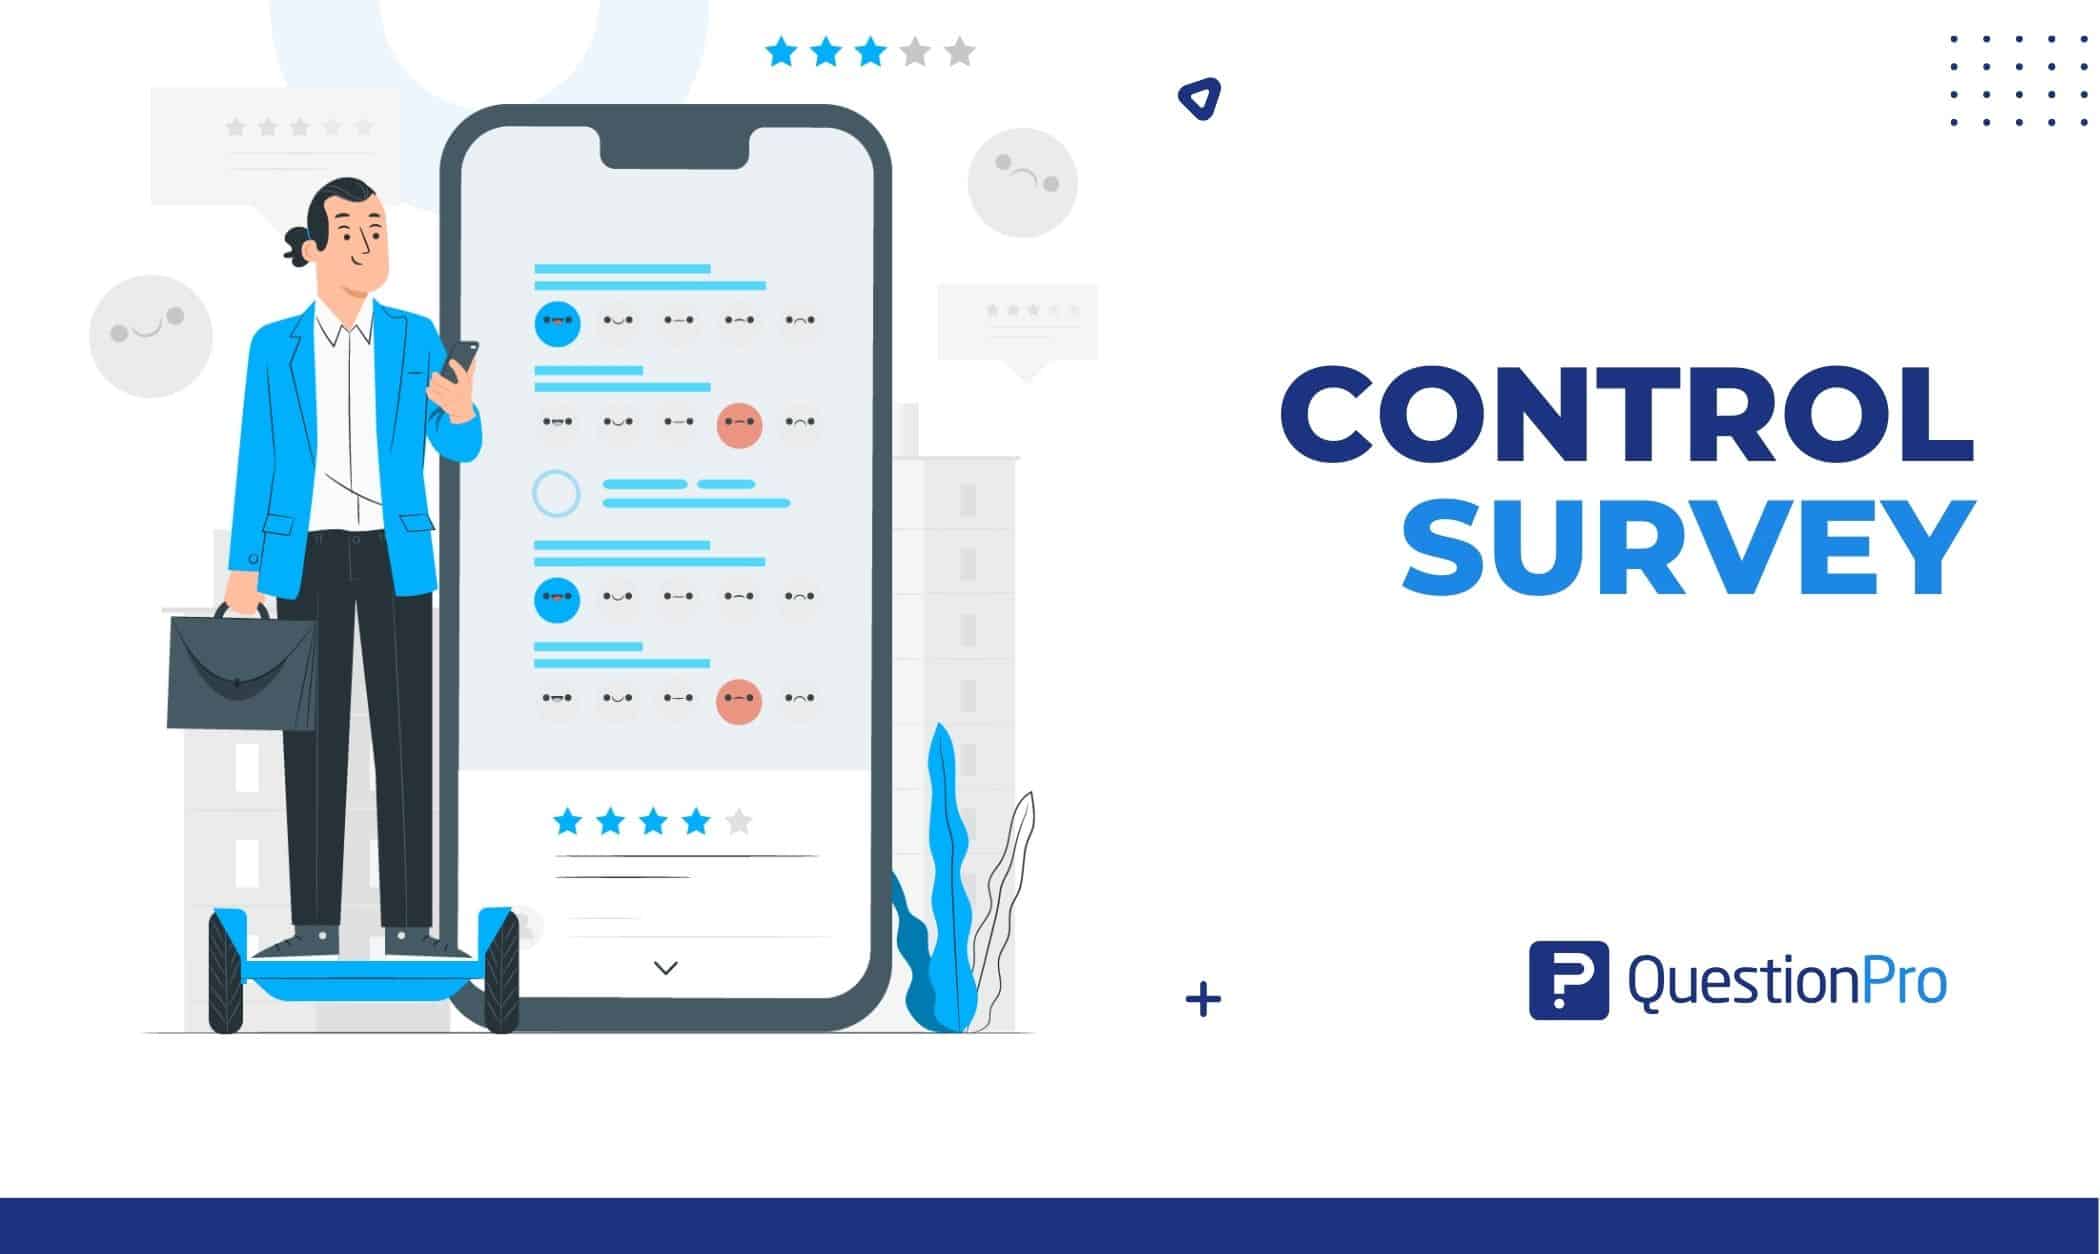 Control survey provides horizontal or vertical position data for additional surveys or mapmaking. It sets the accuracy standards. Learn more.